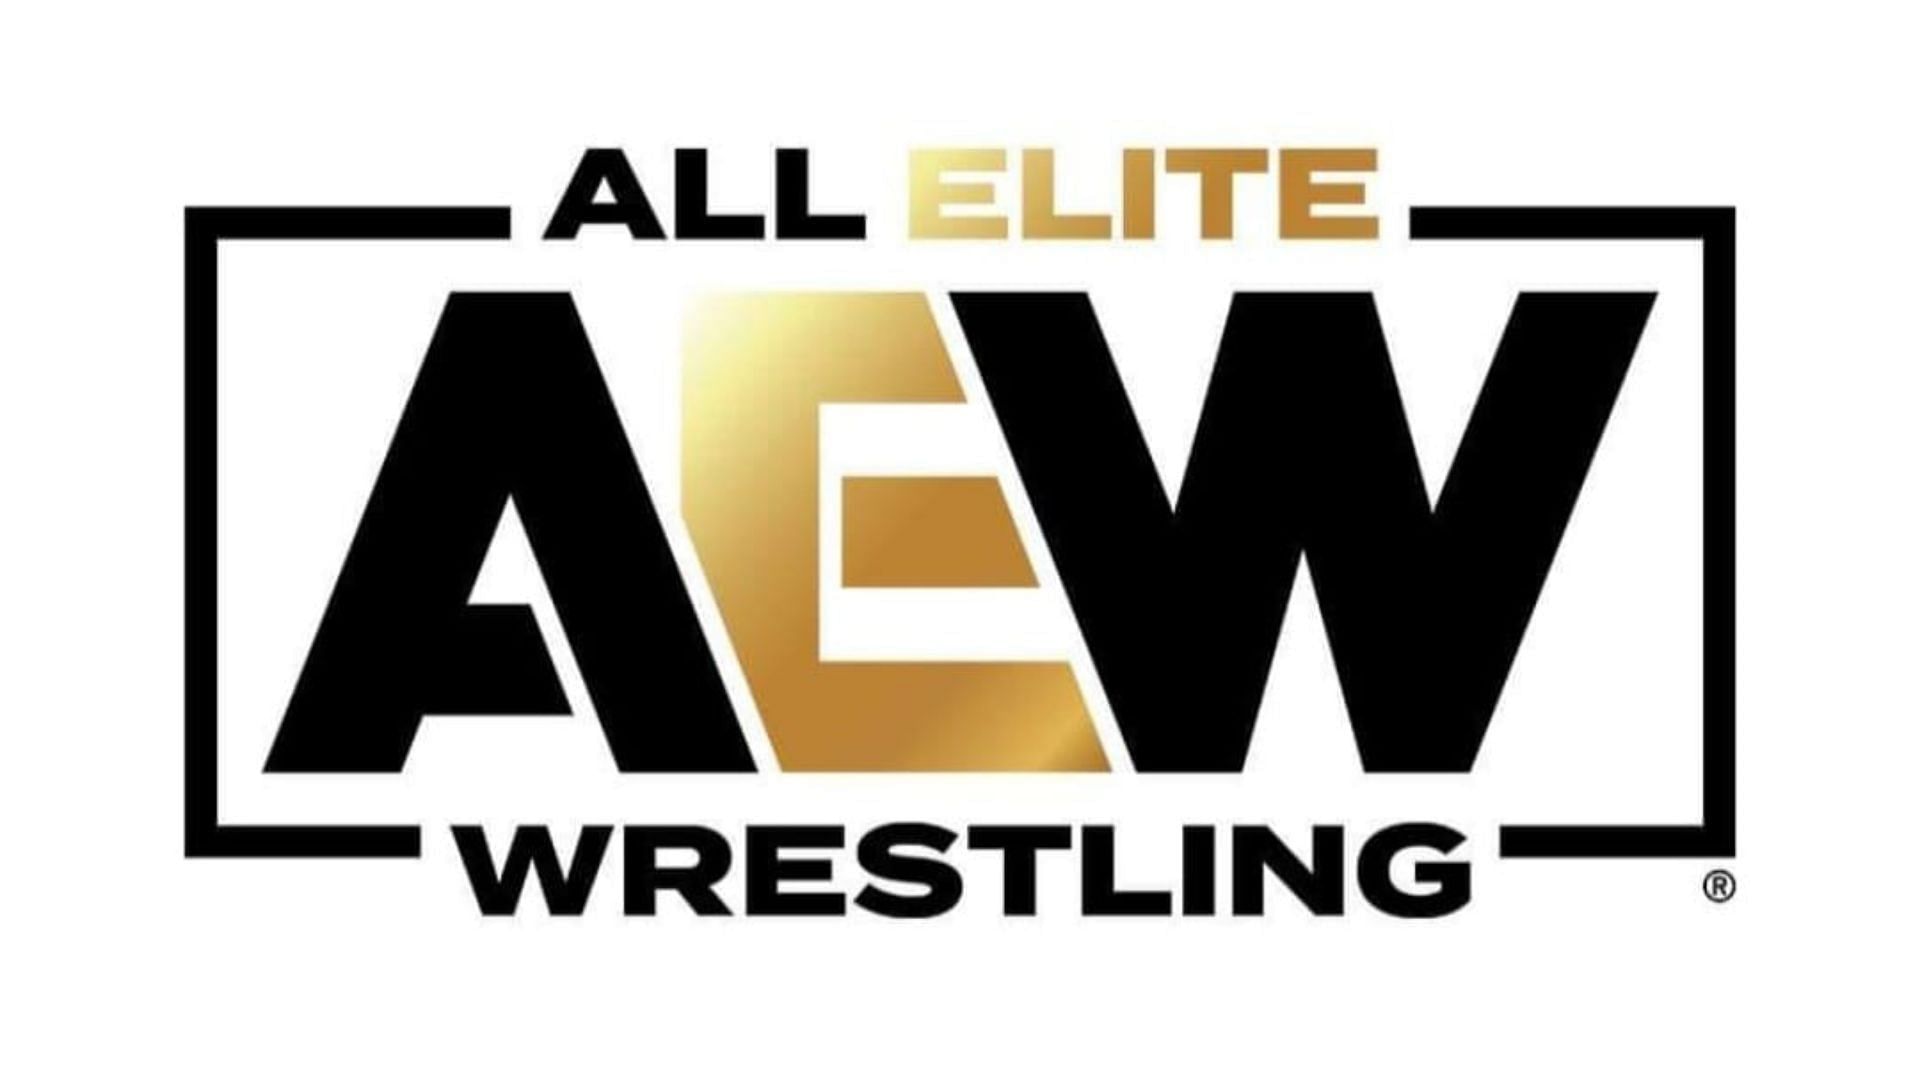 All Elite Wrestling is the home to many great talents.